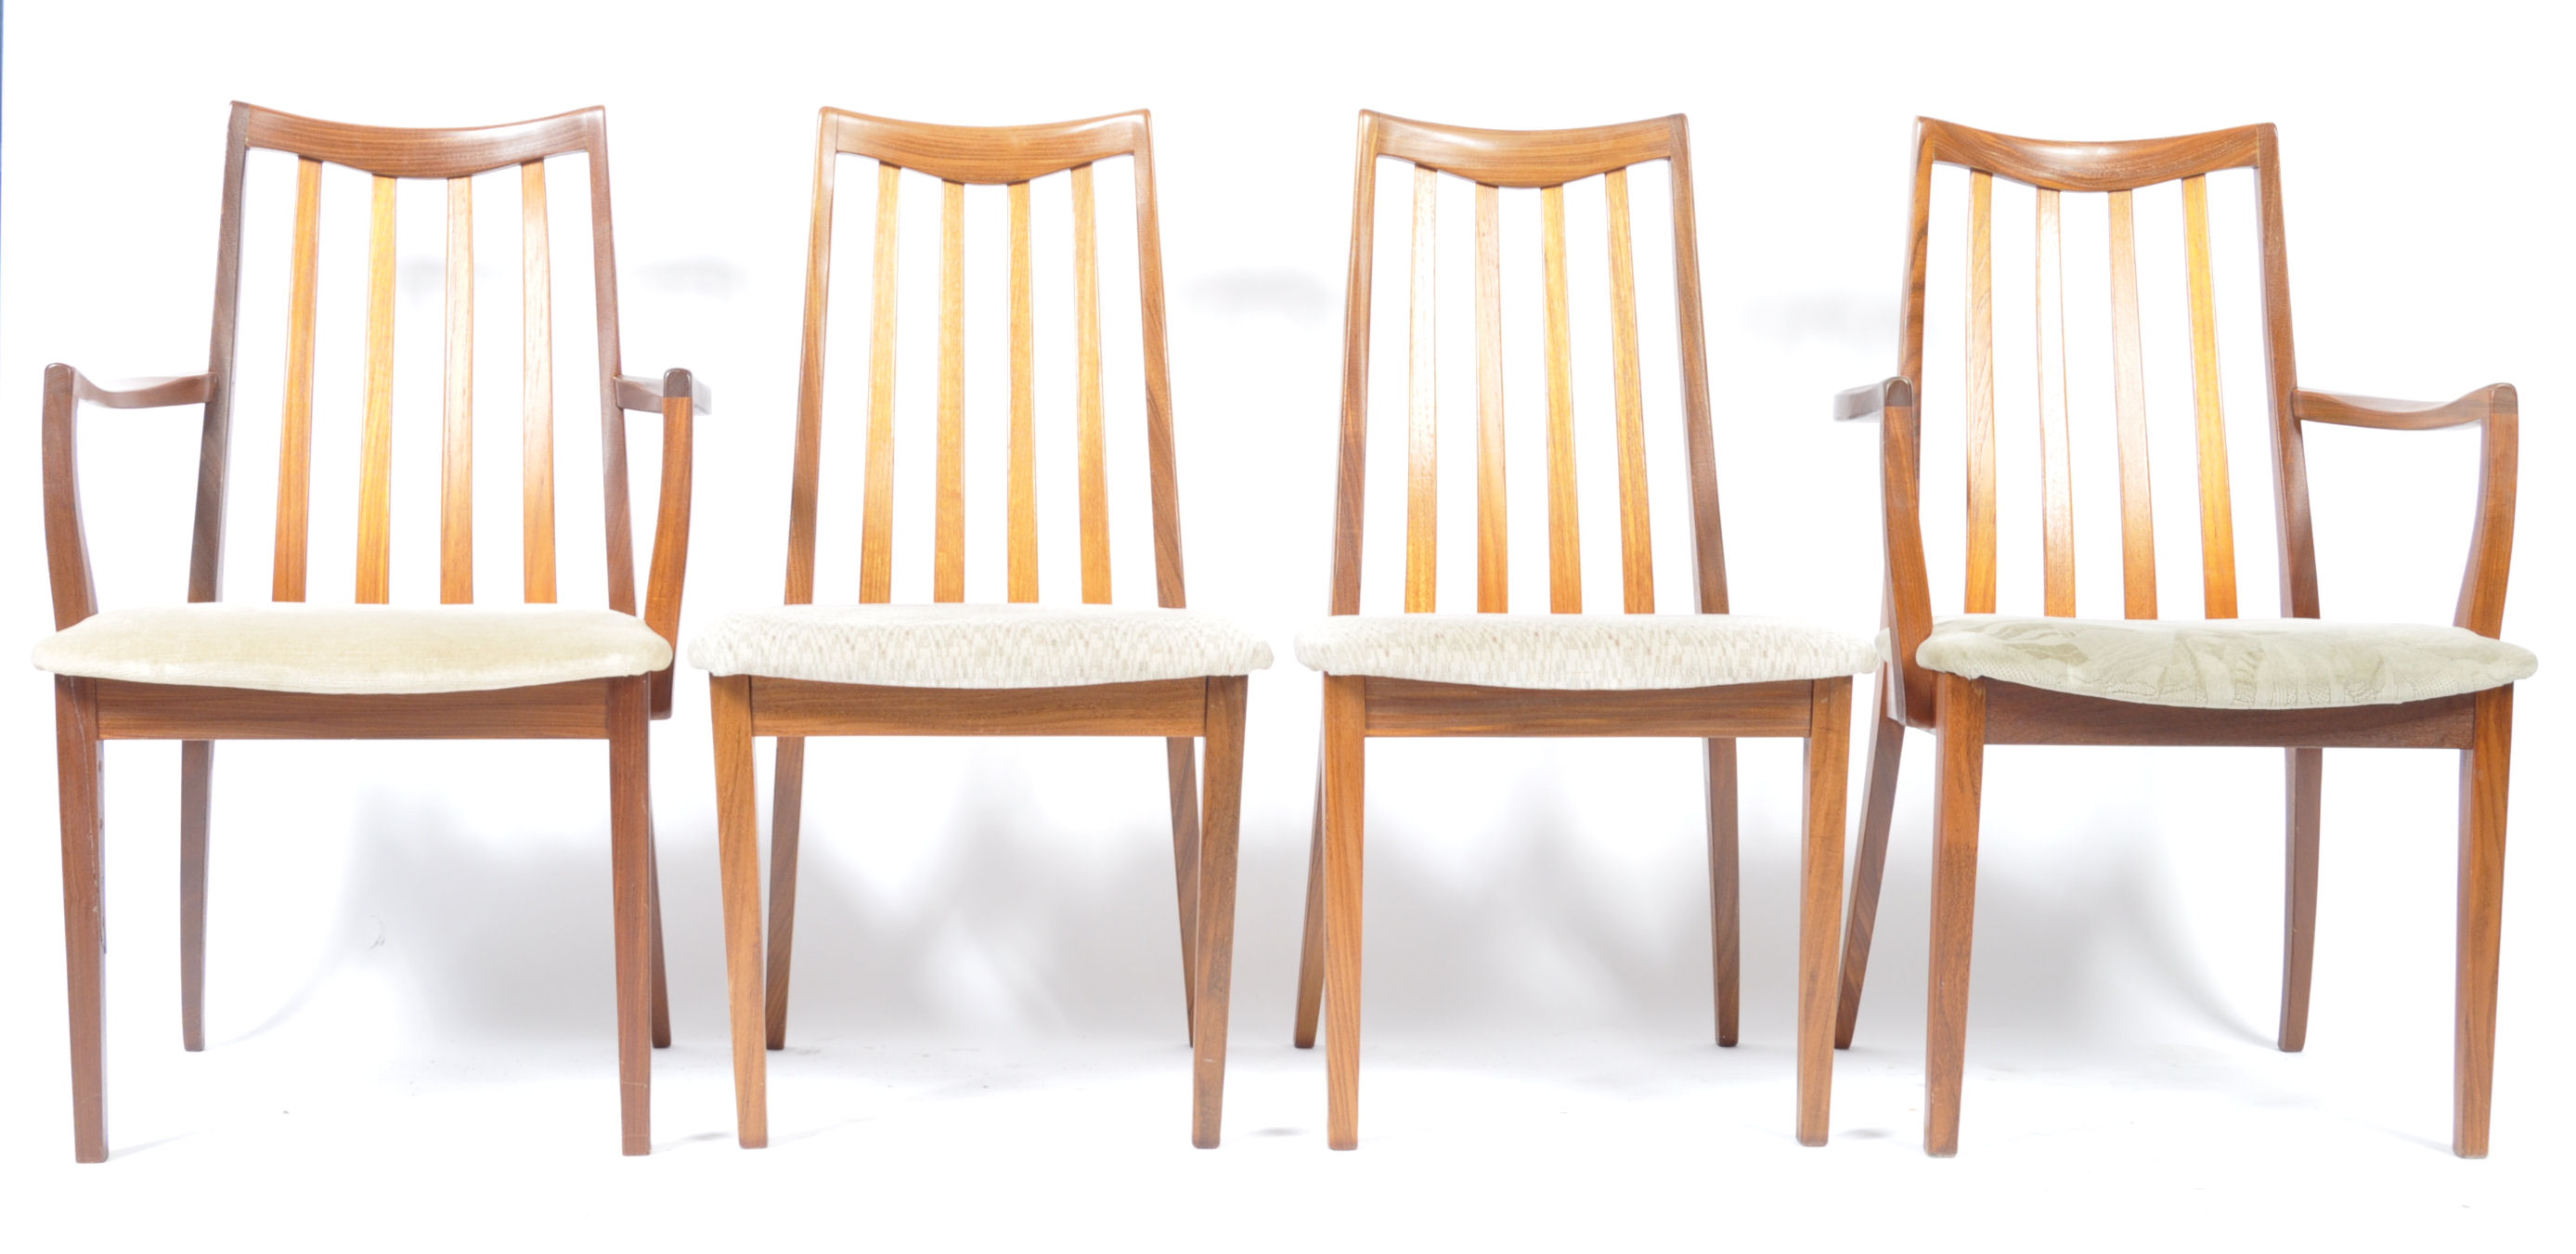 LESLIE DANDY FOR G-PLAN SET OF 4 TEAK WOOD DINING CHAIRS